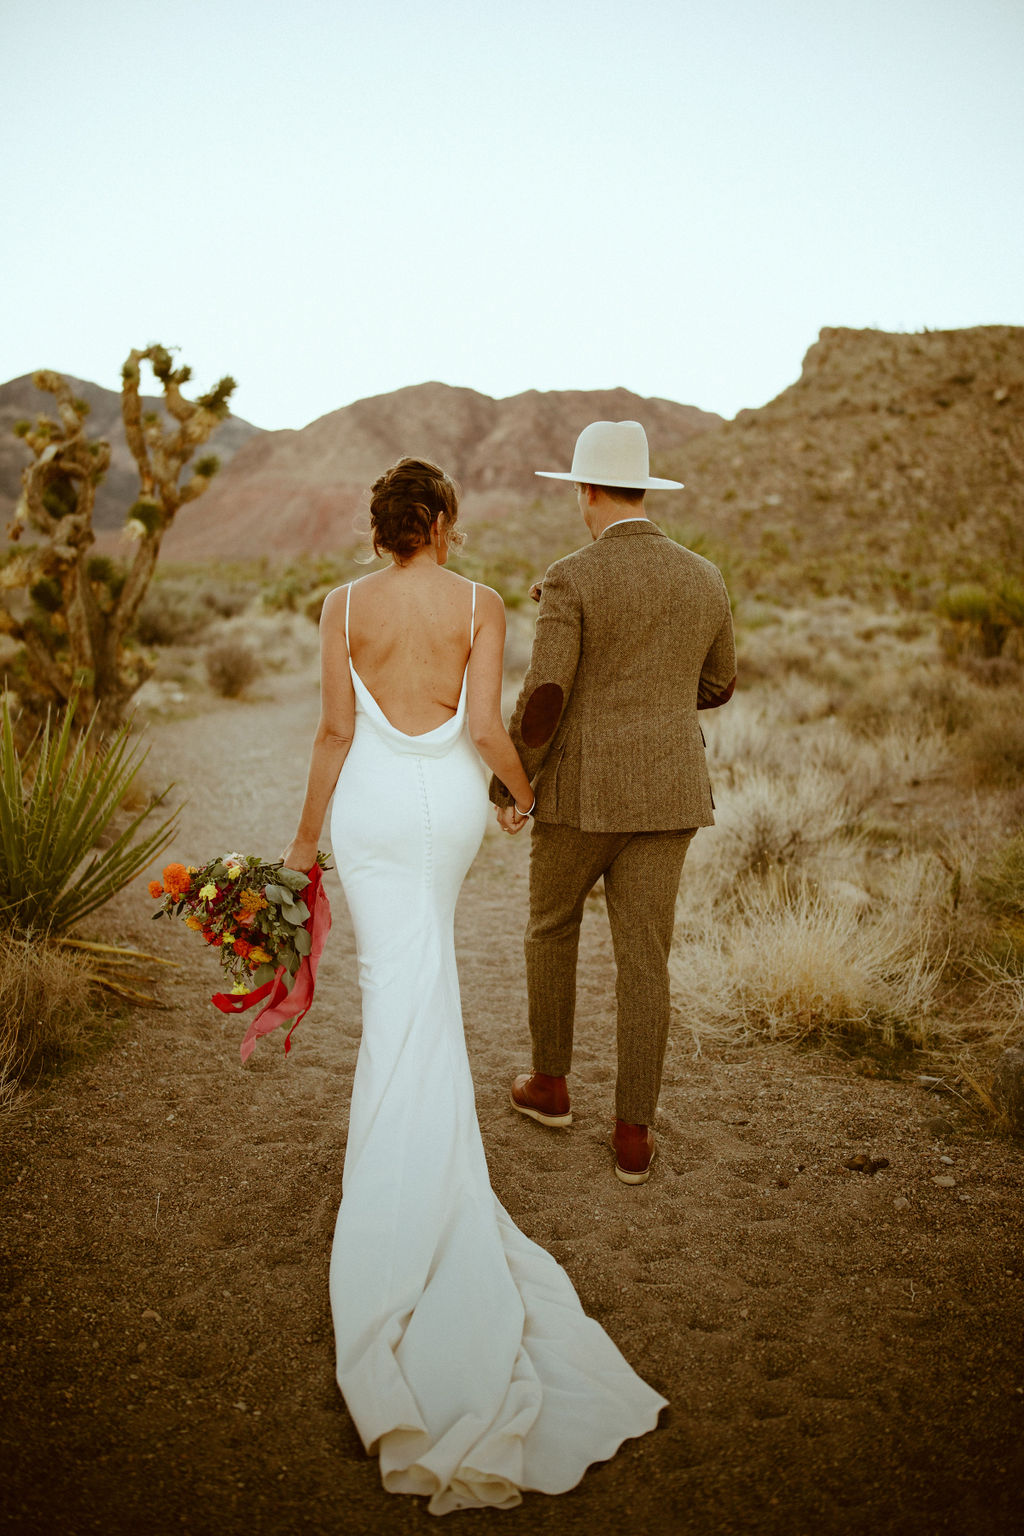 Bride in white backless gown with Groom in brown tweed suit and cream colored hat walking through desert together with cactus and mountains 